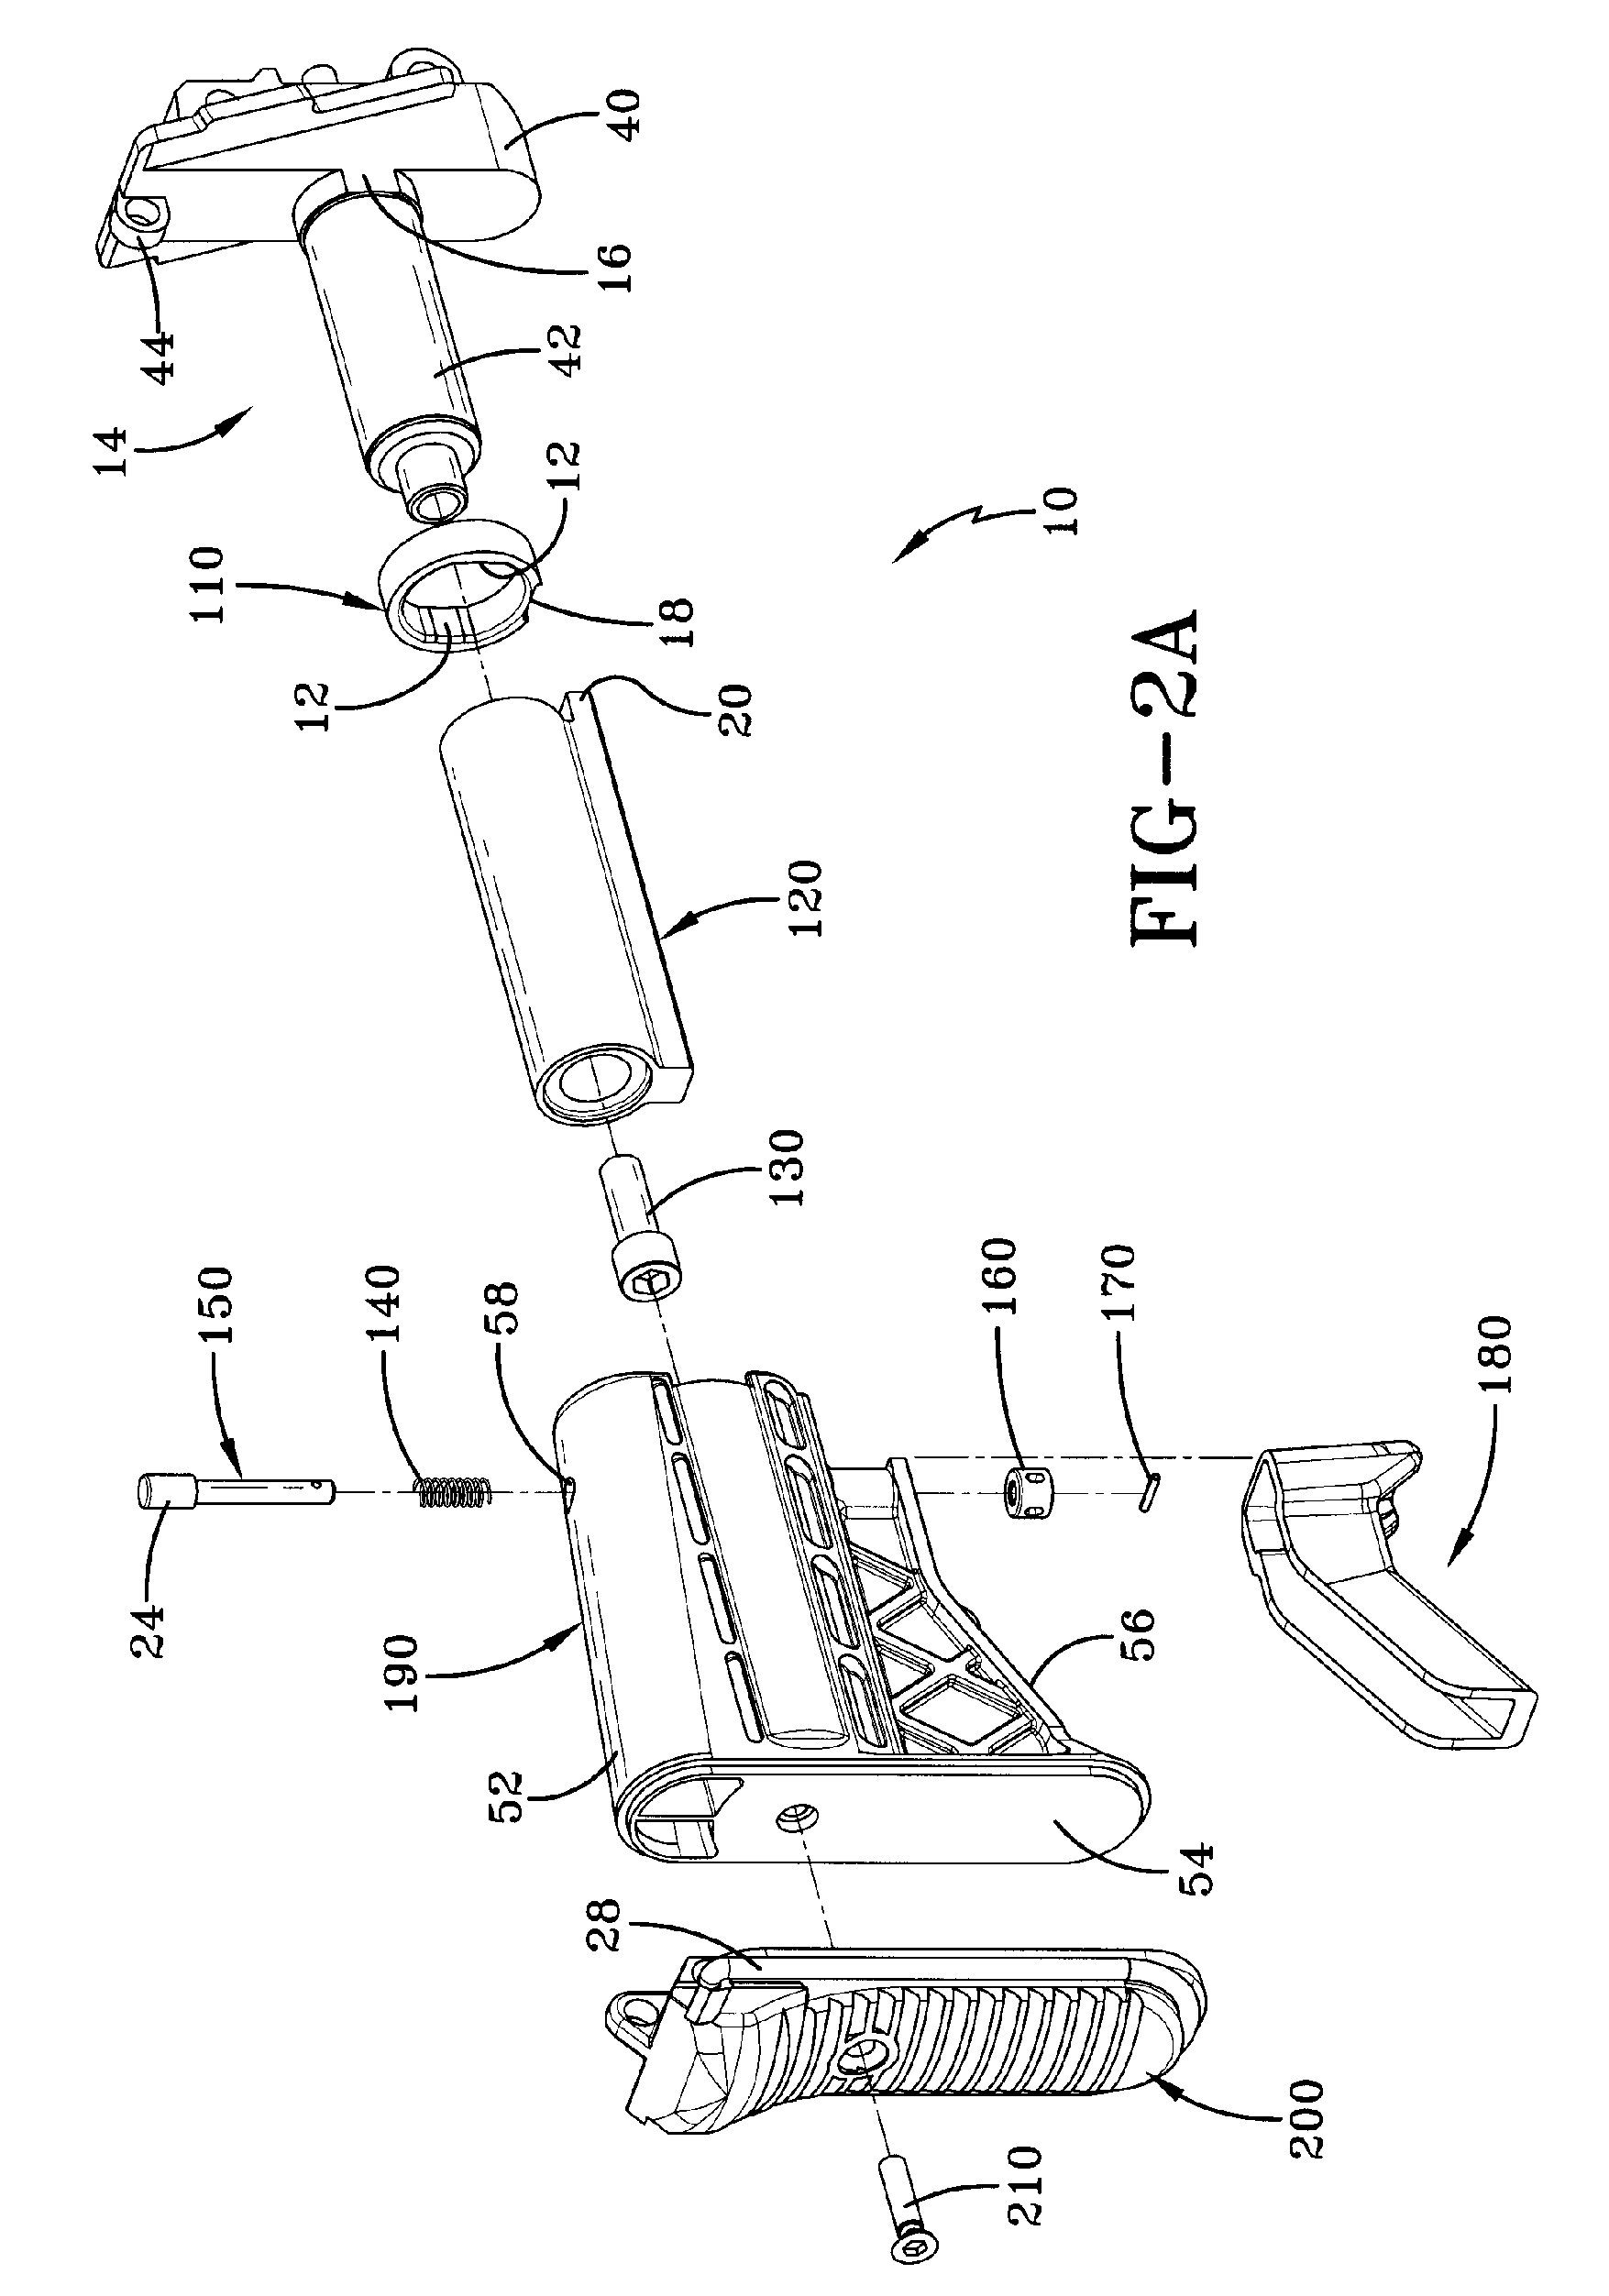 Collapsible buttstock for firearm